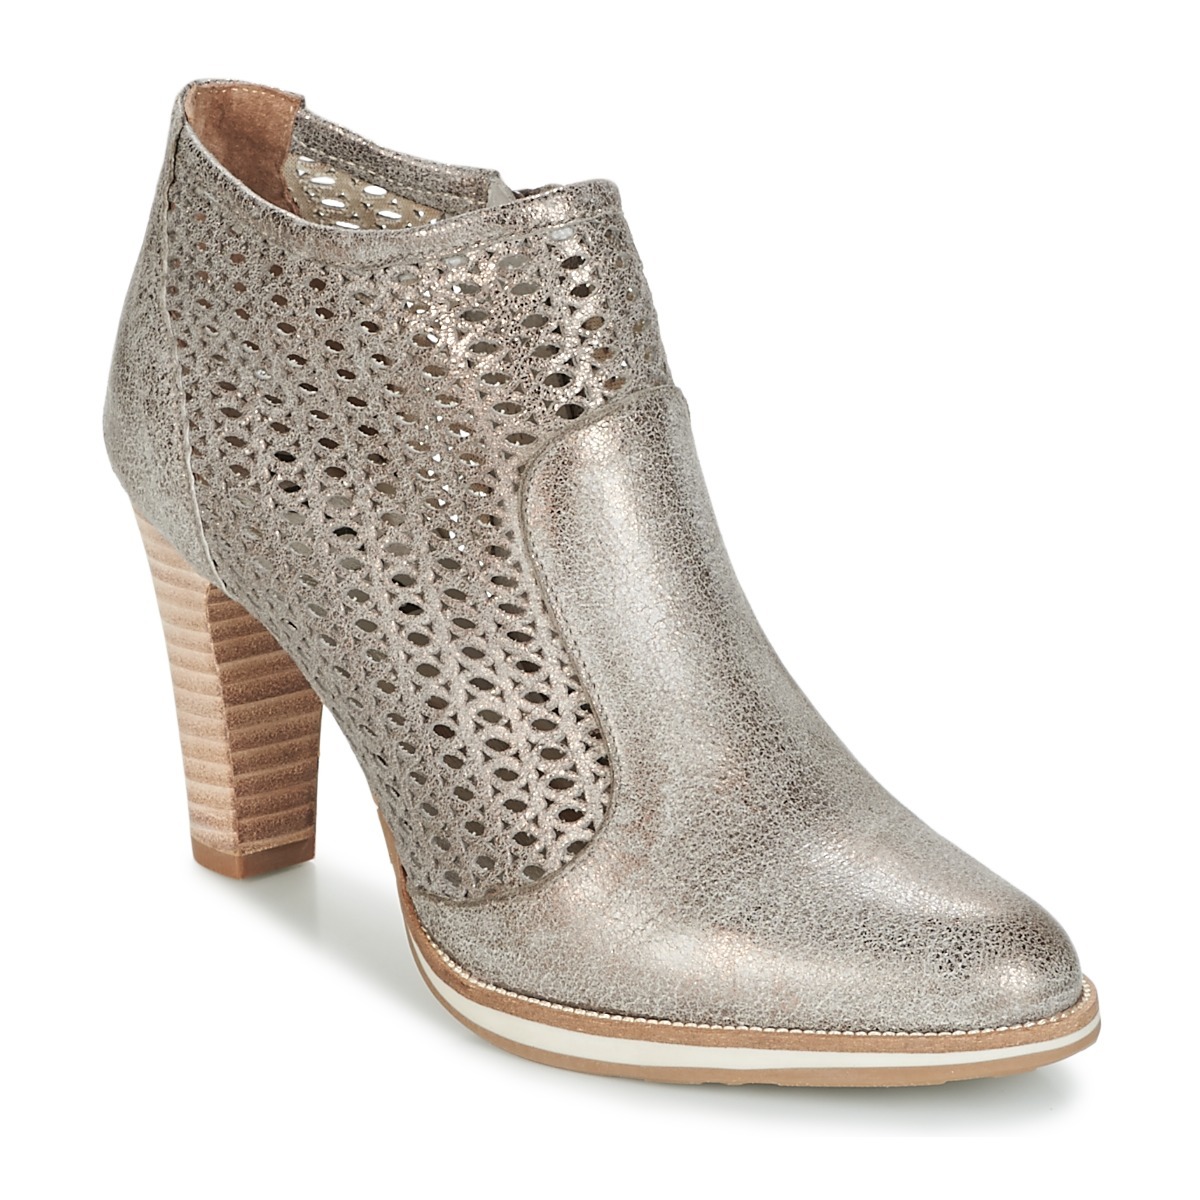 Myma Ankle Boots in Silver for Woman at Spartoo GOOFASH